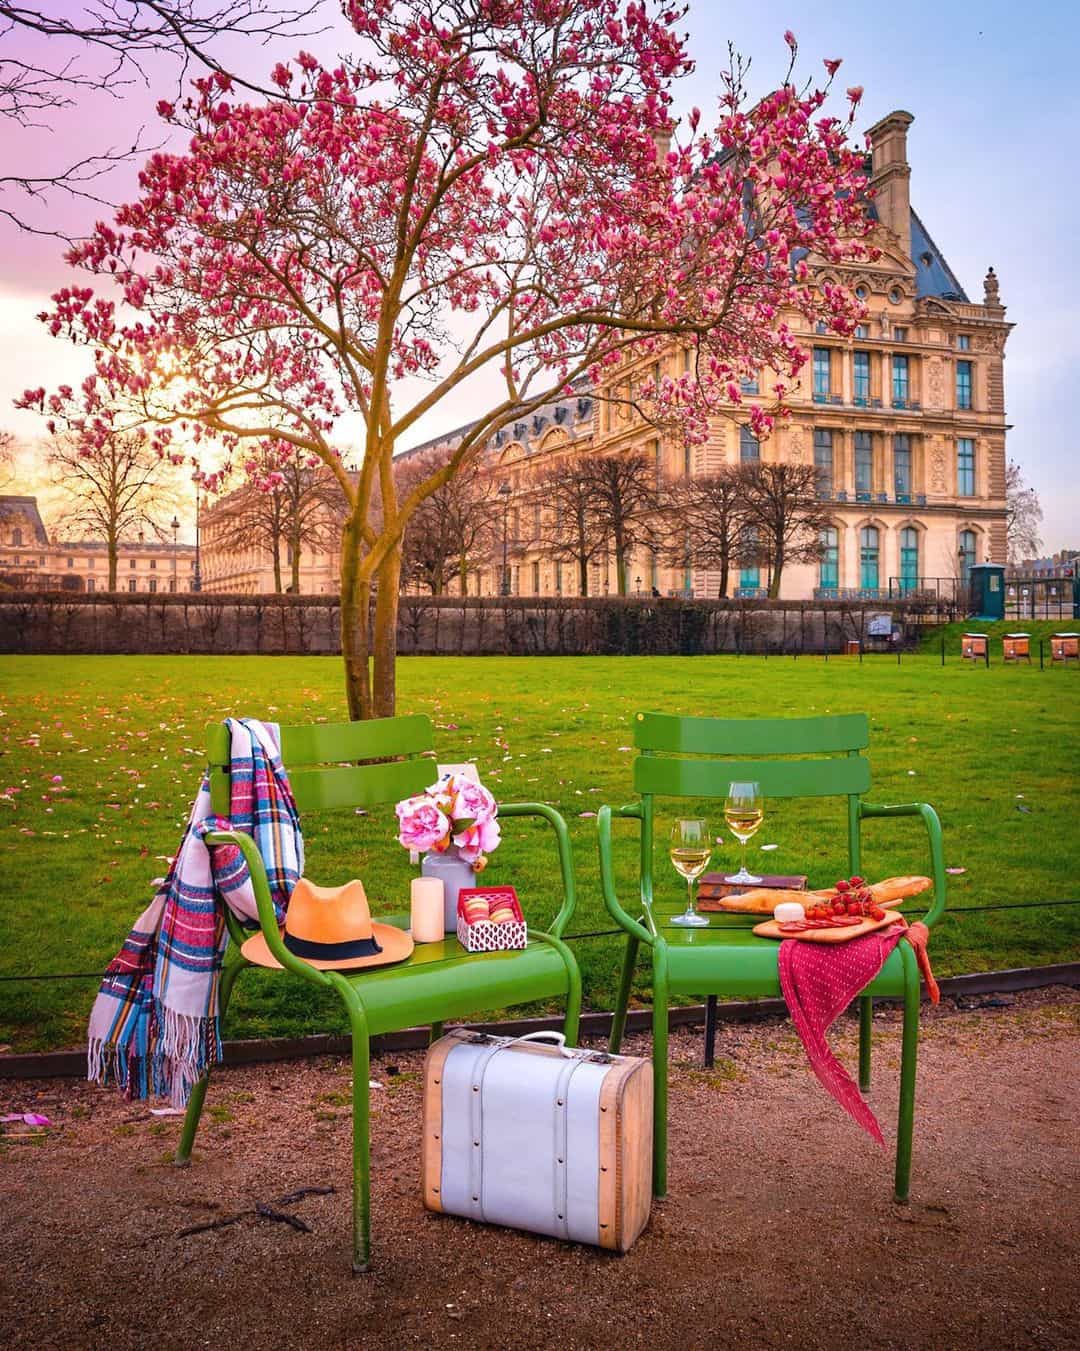 Parks in Paris in the Spring